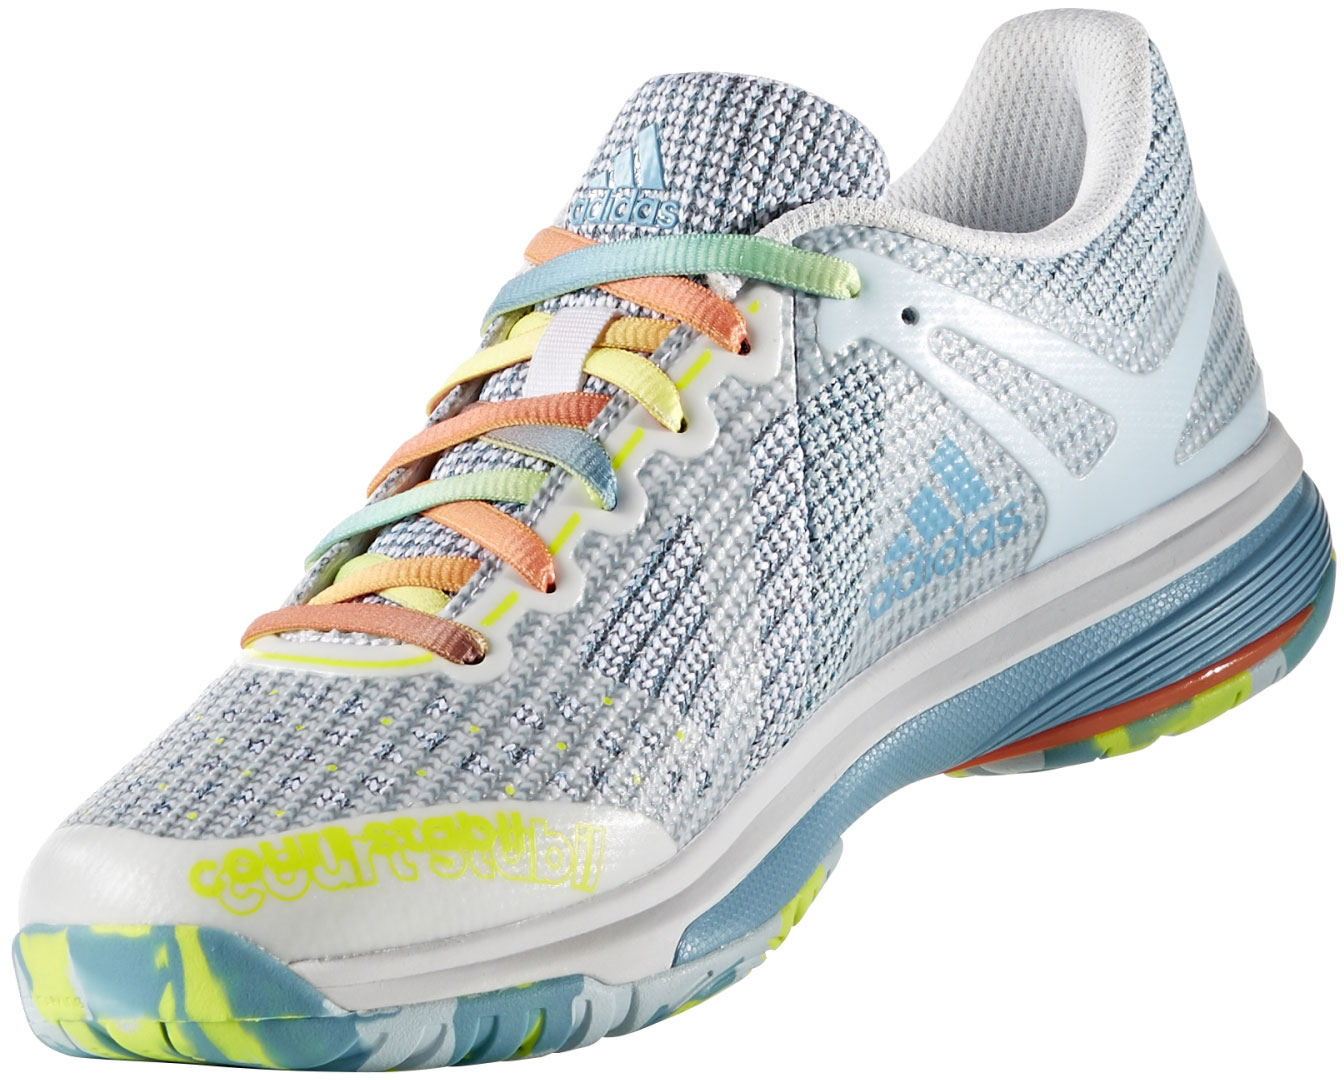 Tranquility tiger Omitted adidas COURT STABIL 13 W | sportisimo.com